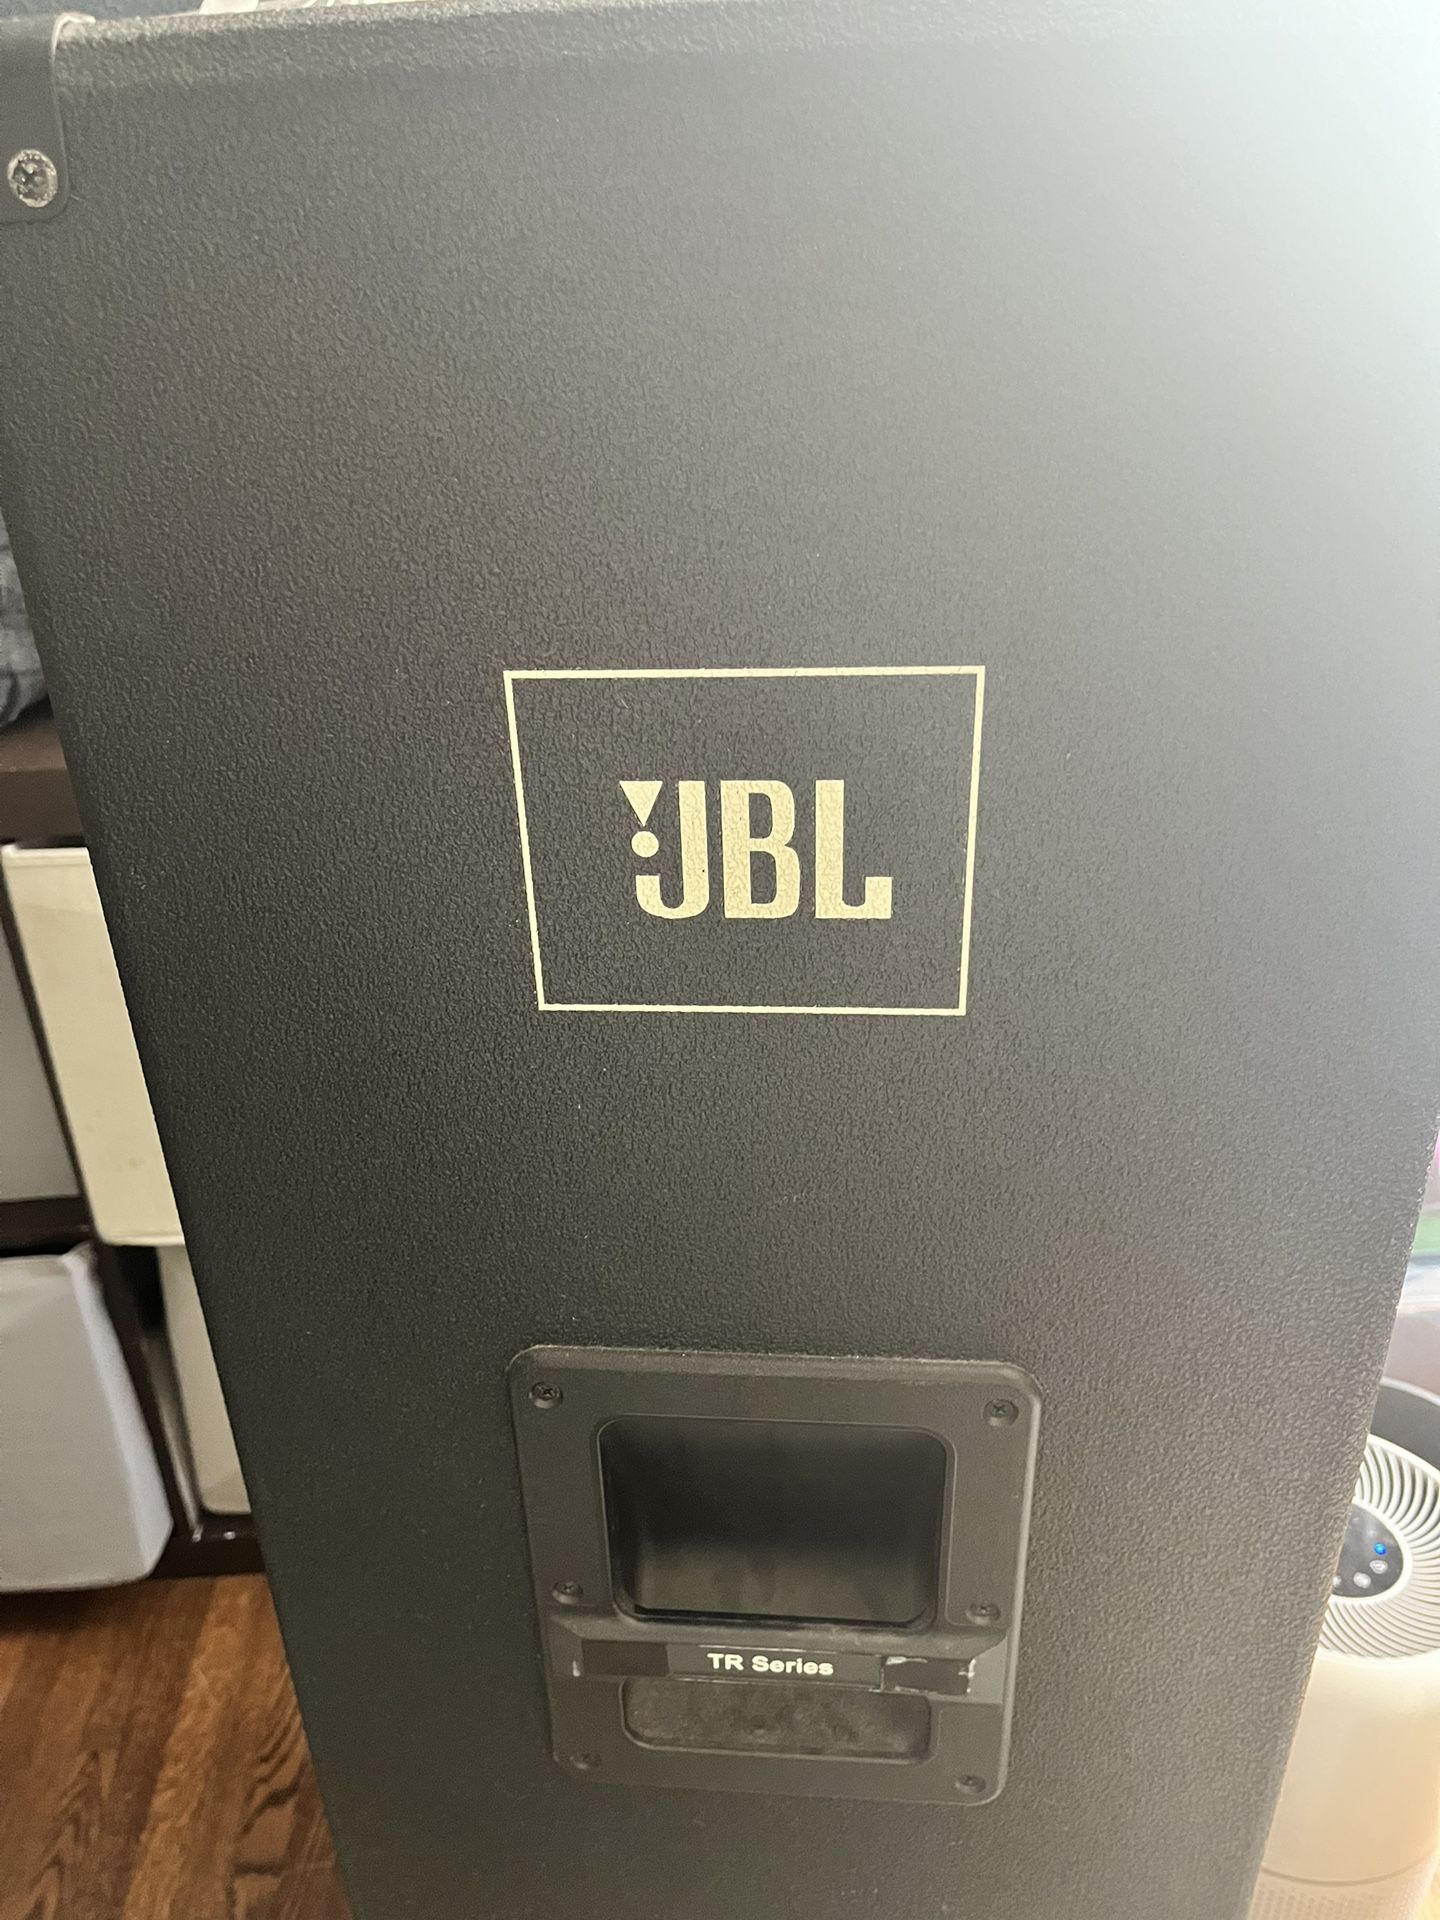 Jbl Speaker For 250 Very Nice It Works. I Just Need To Get It Out Of My Space . MESSAGE ASAP! 